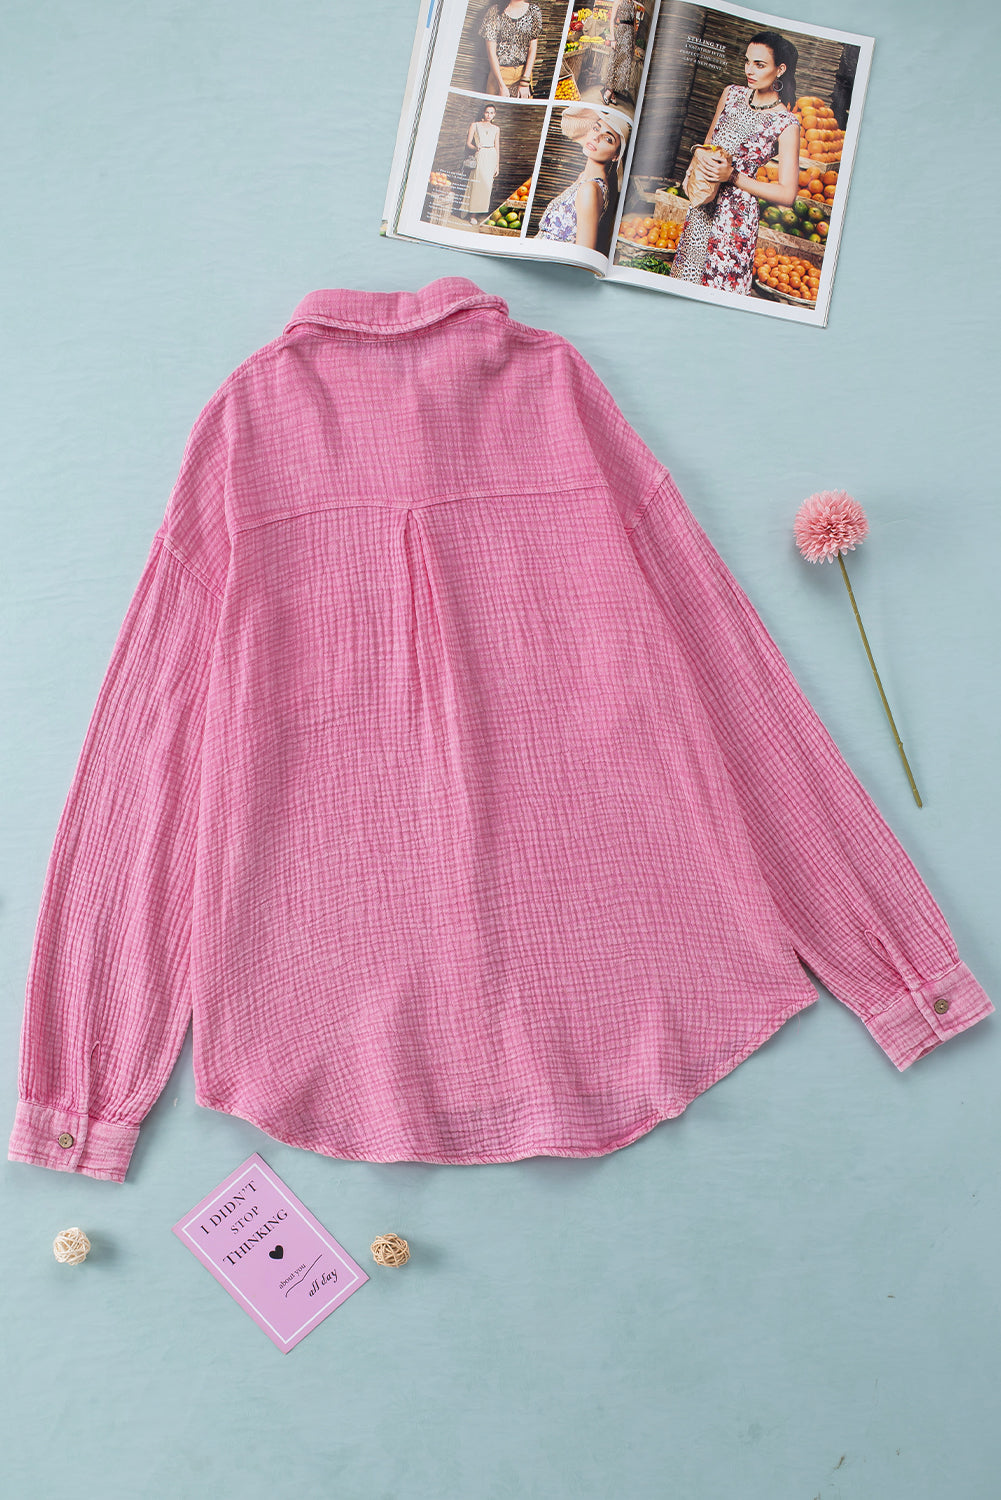 Pink Mineral Wash Crinkle Textured Chest Pockets Shirt